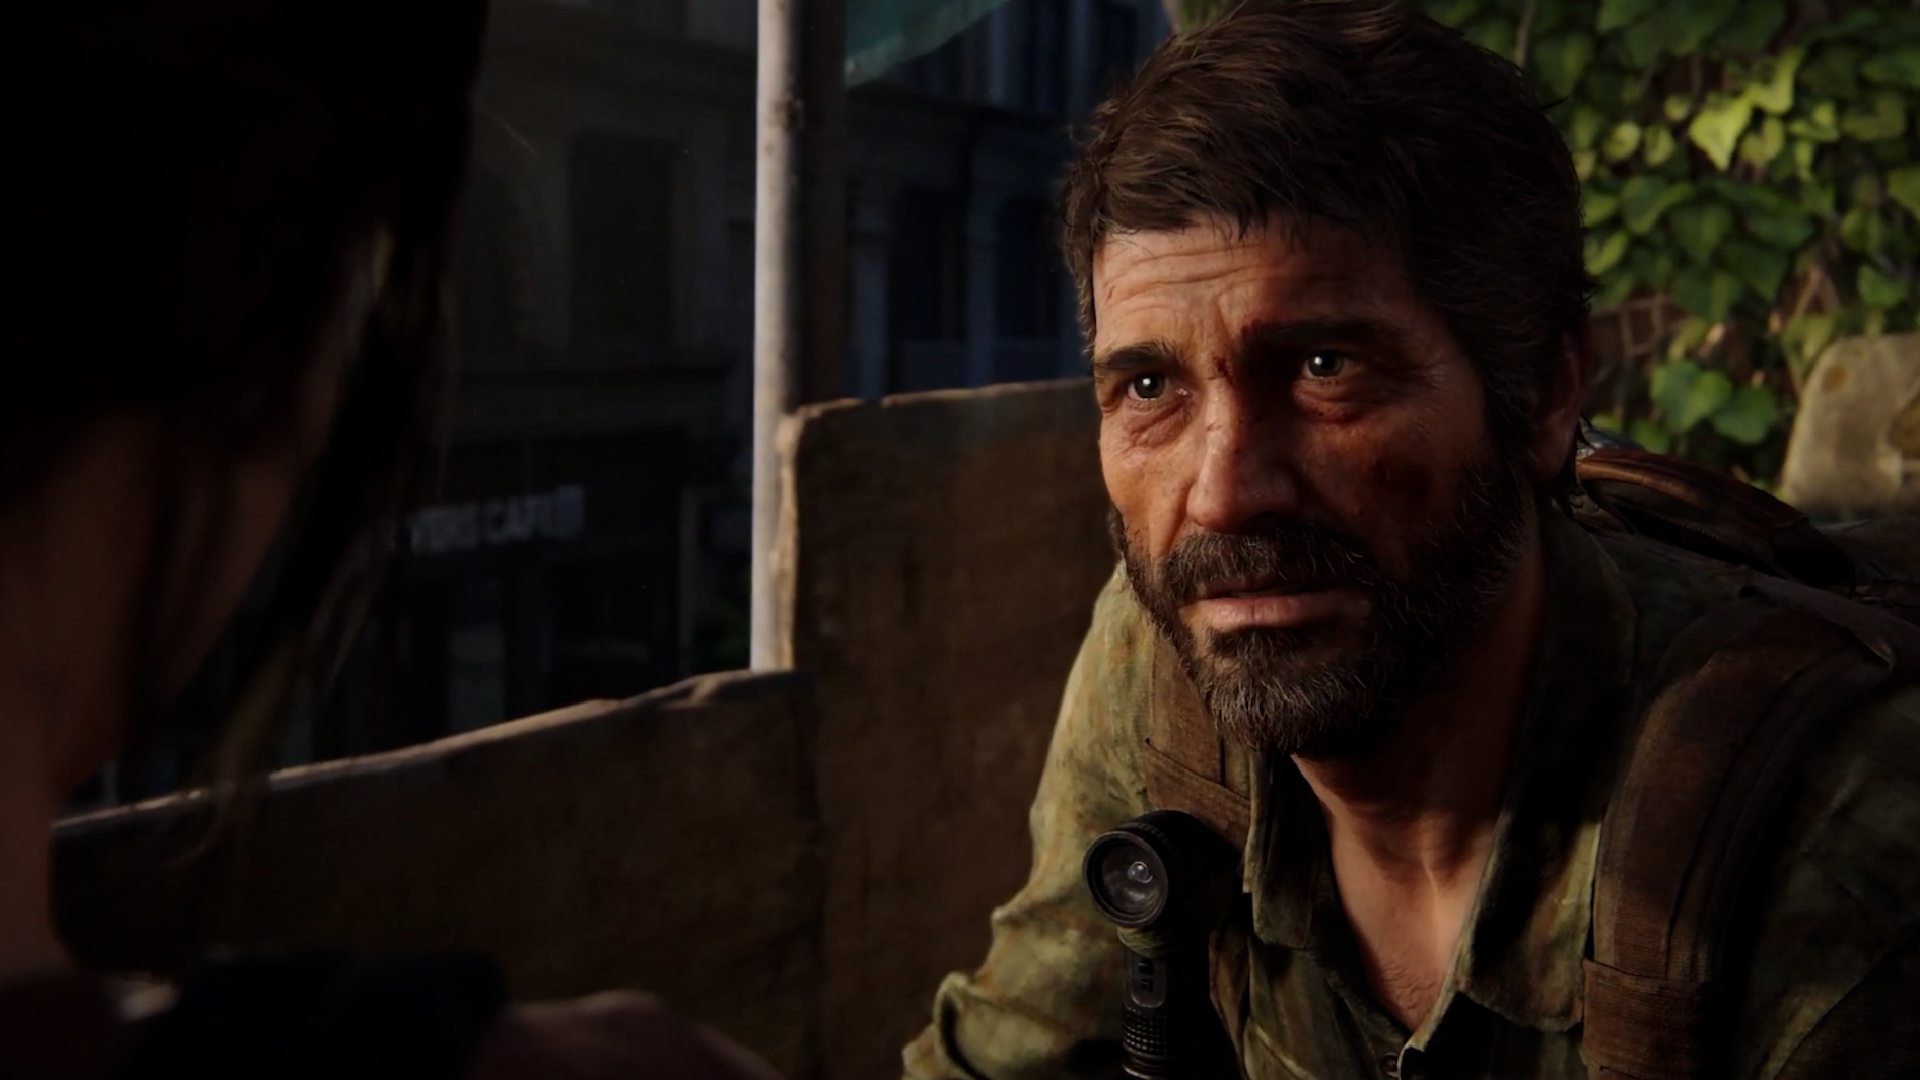 The Last Of Us Part 2 Remastered' reveals No Return Mode in new trailer